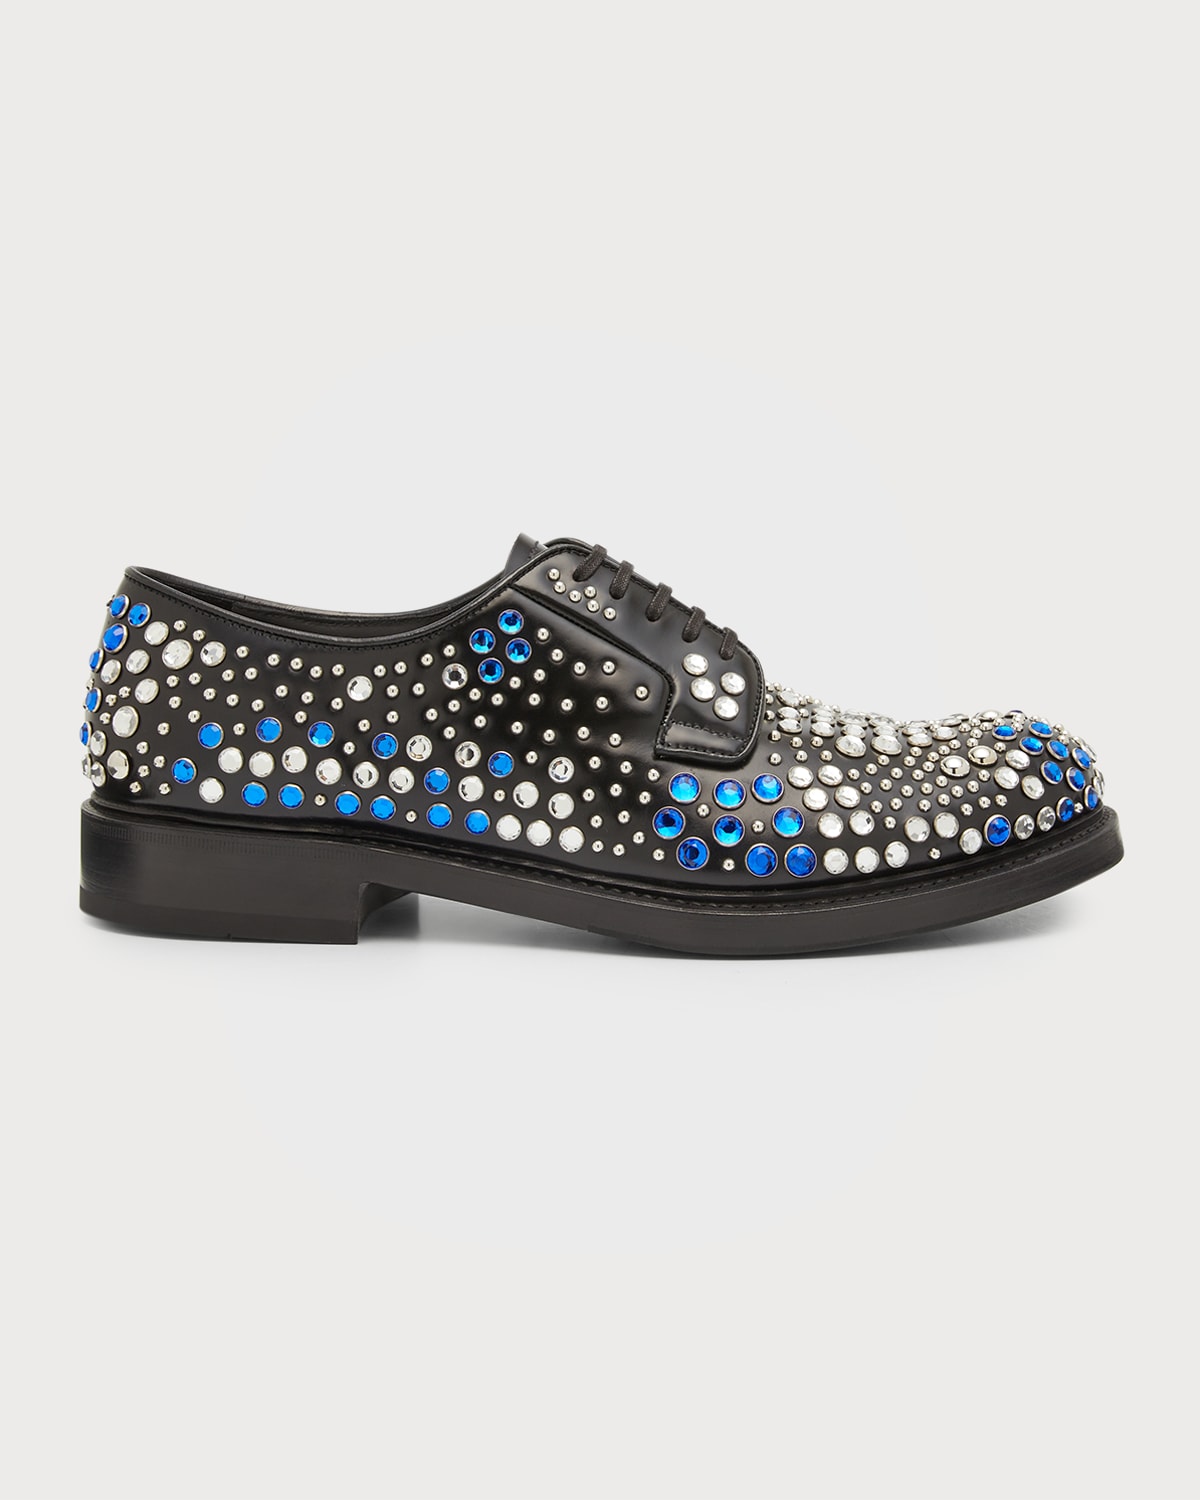 PRADA MEN'S LEATHER DERBY SHOES WITH STUDS AND RHINESTONES